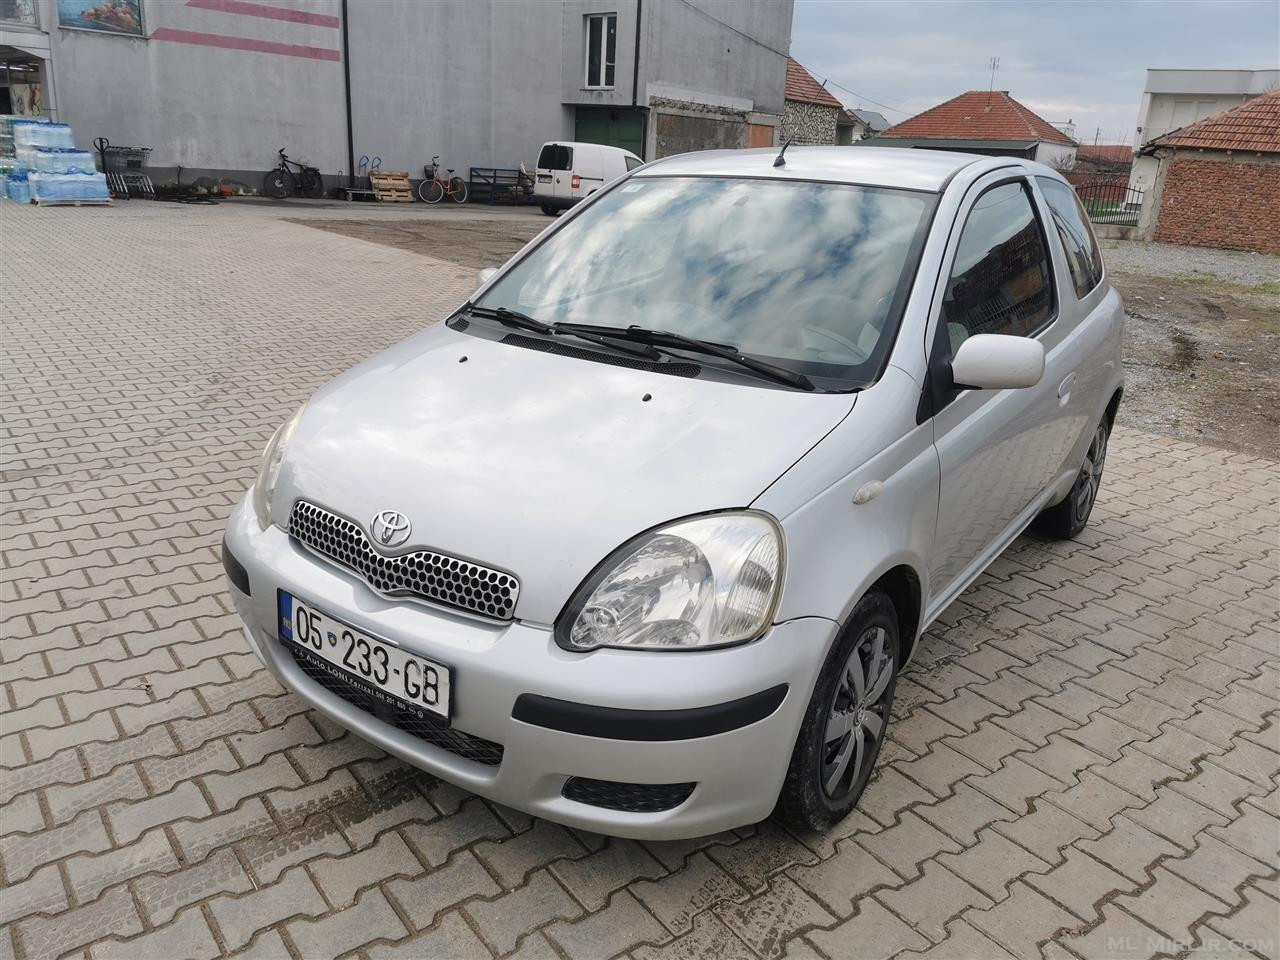 Shes toyota yaris 1.4 disel